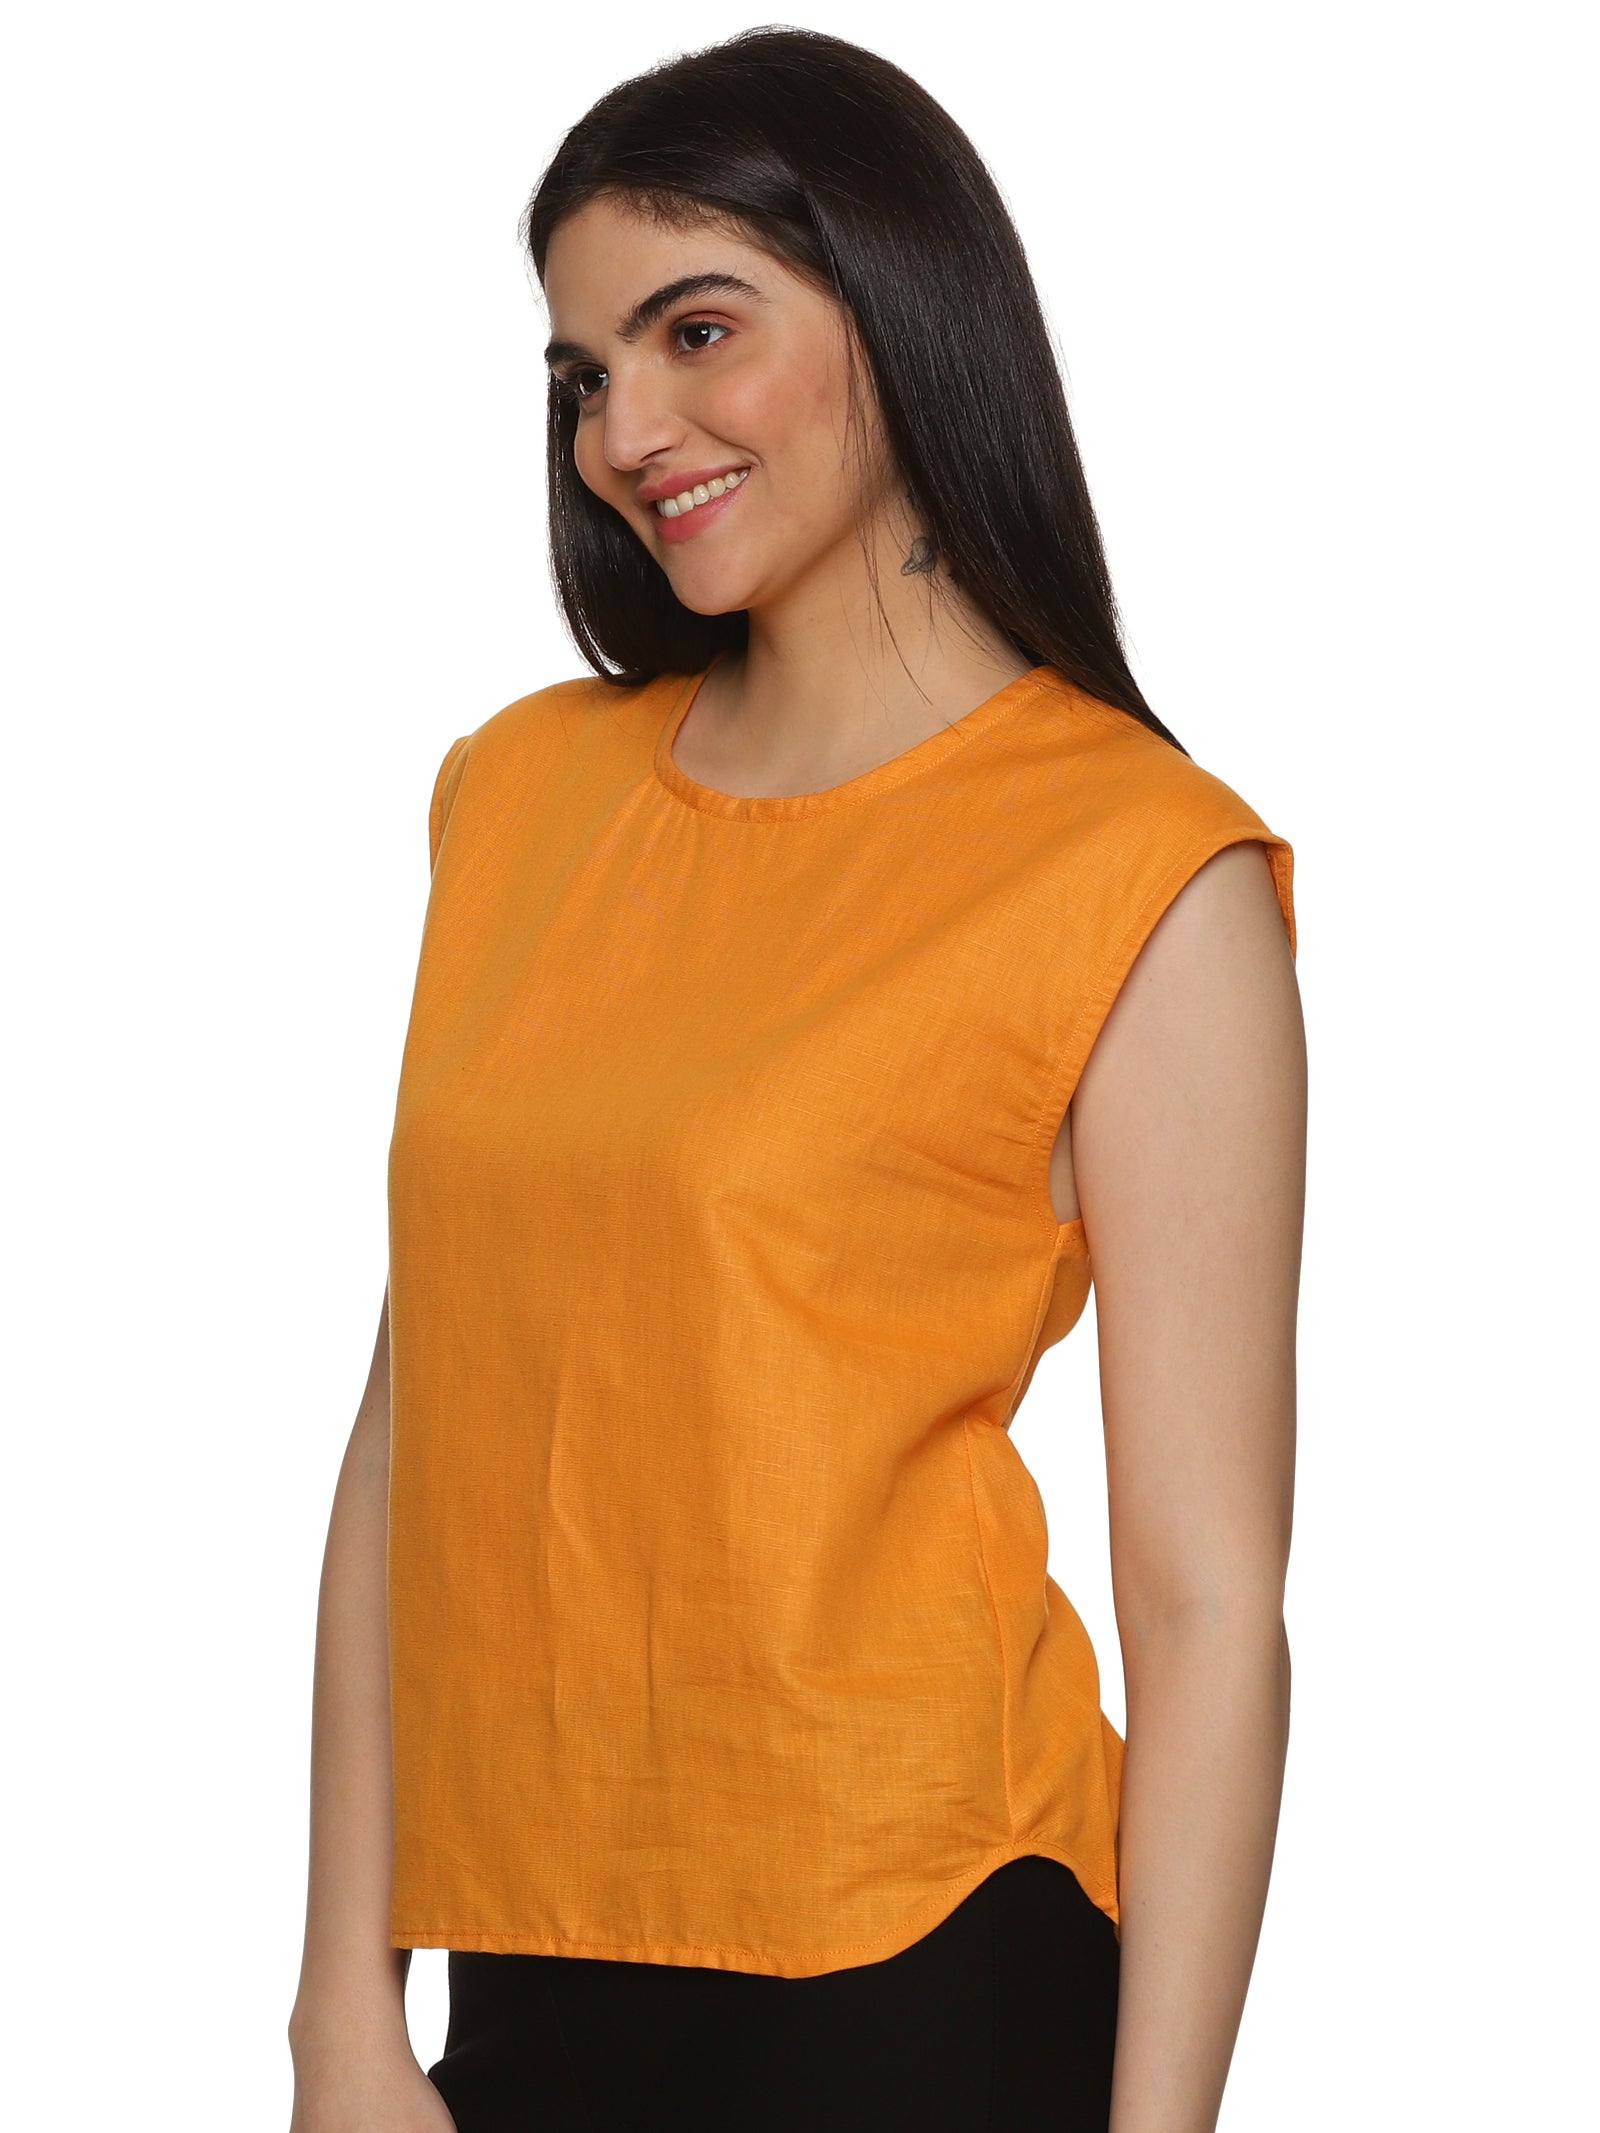 A beautiful picture of lady in Cotton Drop Shoulder Orange Top, womens workwear 